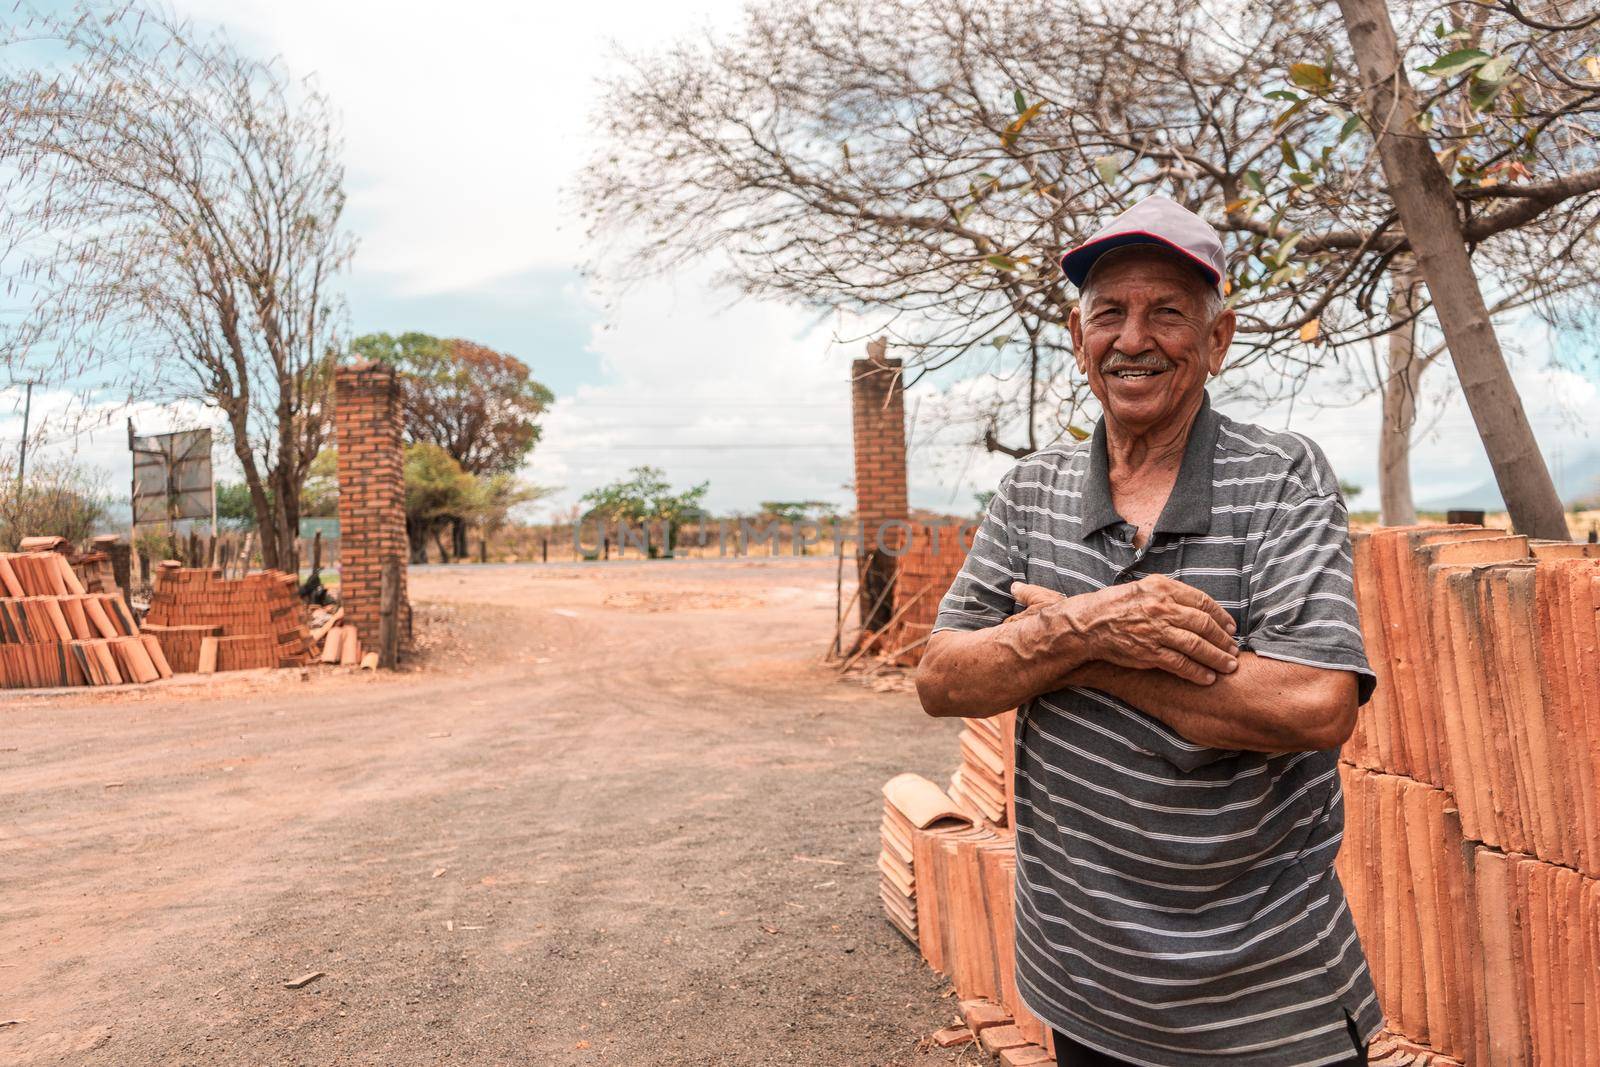 Owner of a traditional brick and clay tile manufacturing business in La Paz Centro. Concept of craft businesses in Nicaragua, Central America and Latin America.